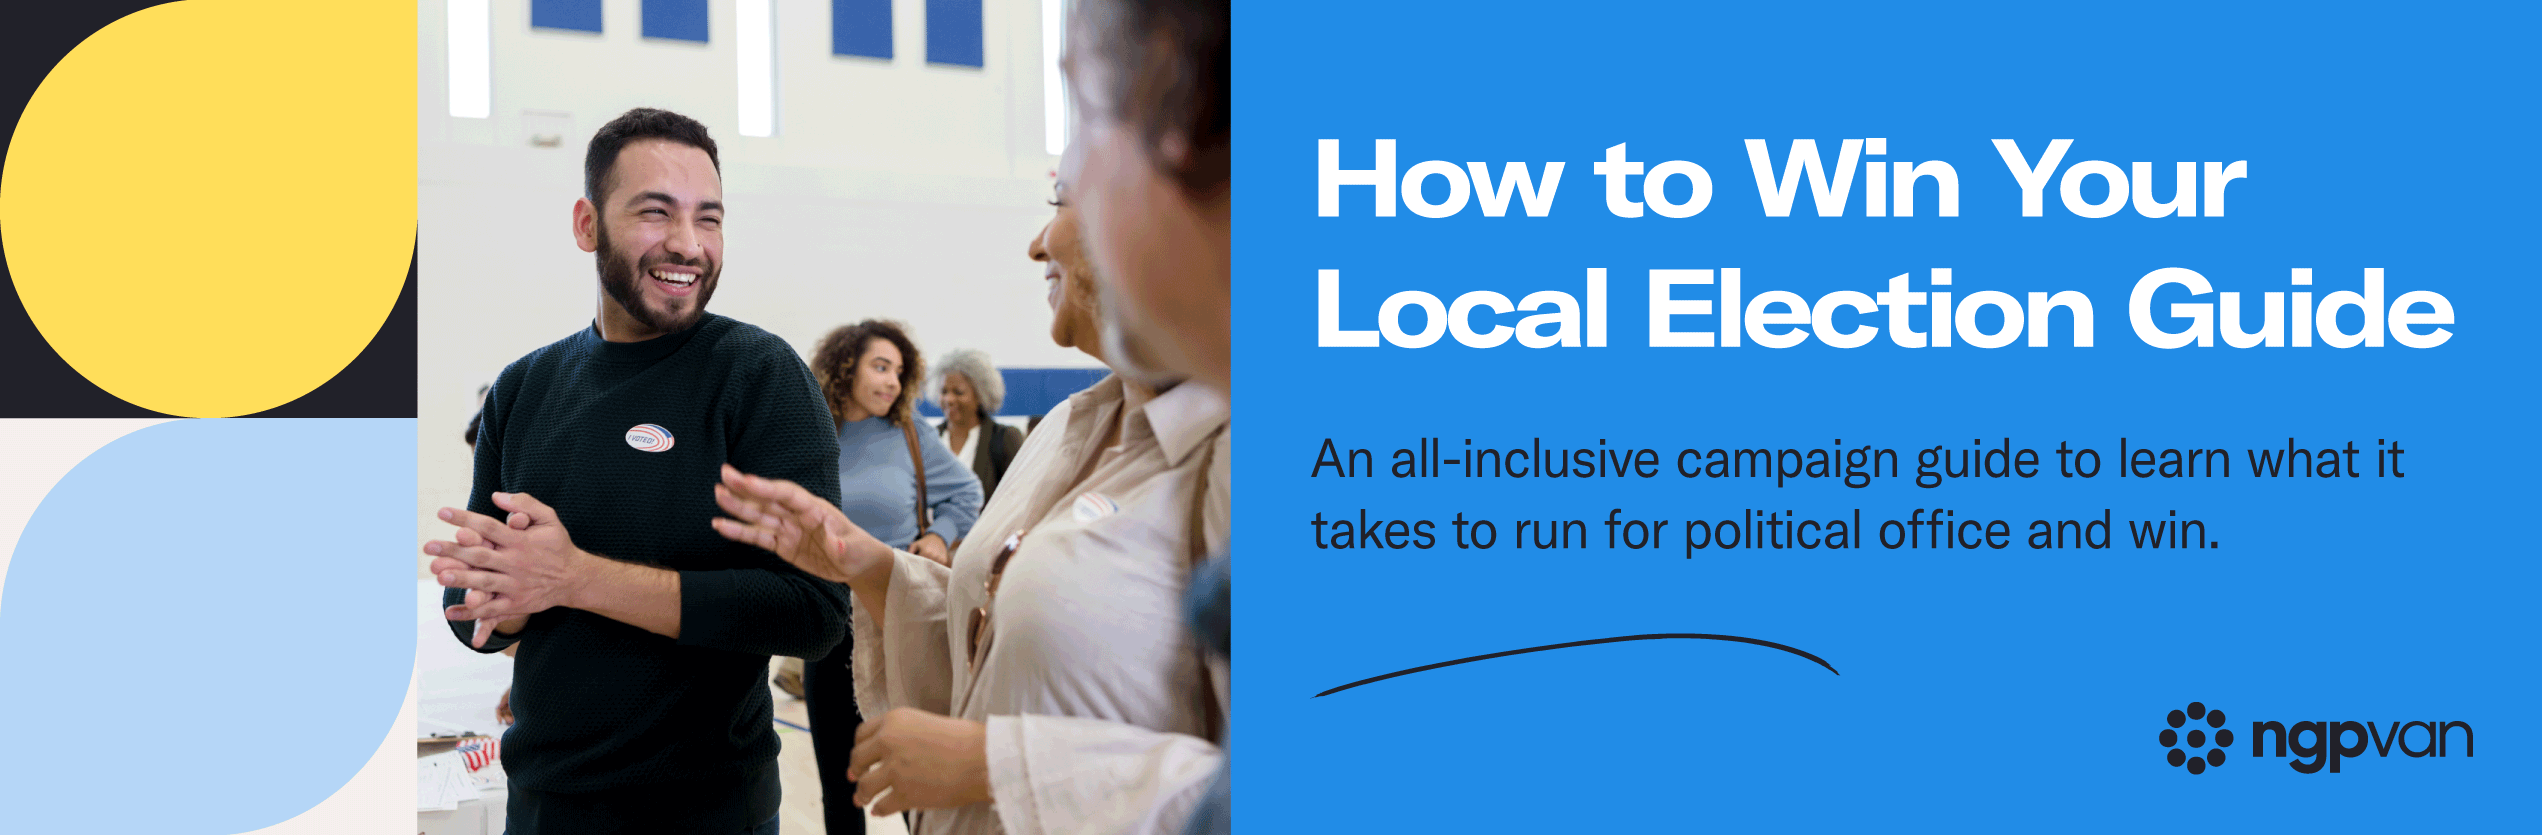 Download the How to Win Your Local Election Guide